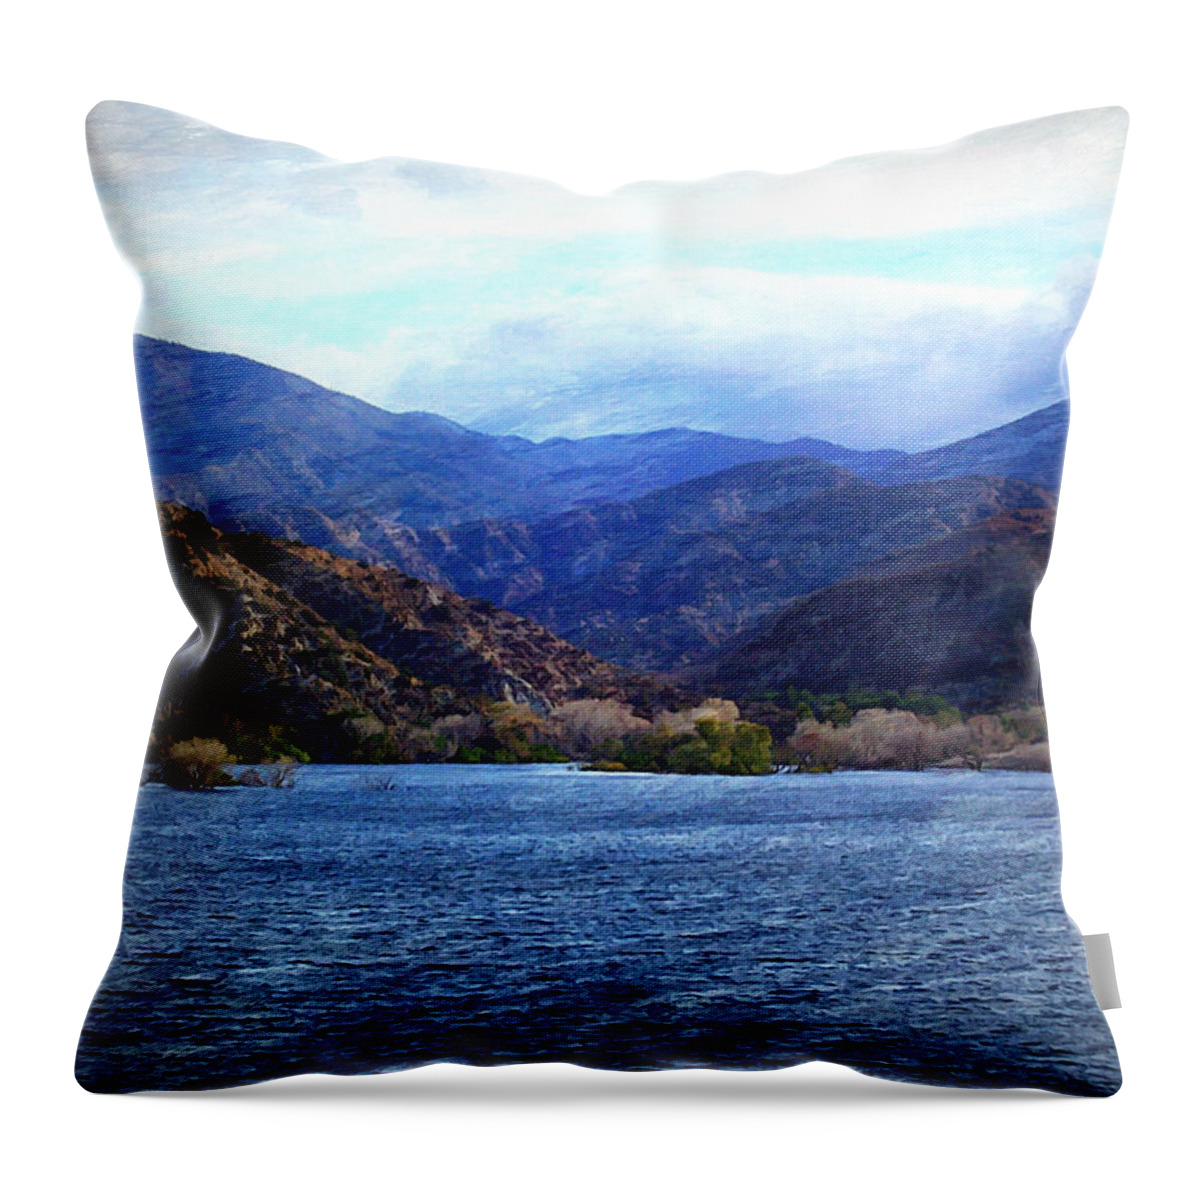 Little Rock Throw Pillow featuring the photograph Choppy Waters Across The Lake by Glenn McCarthy Art and Photography